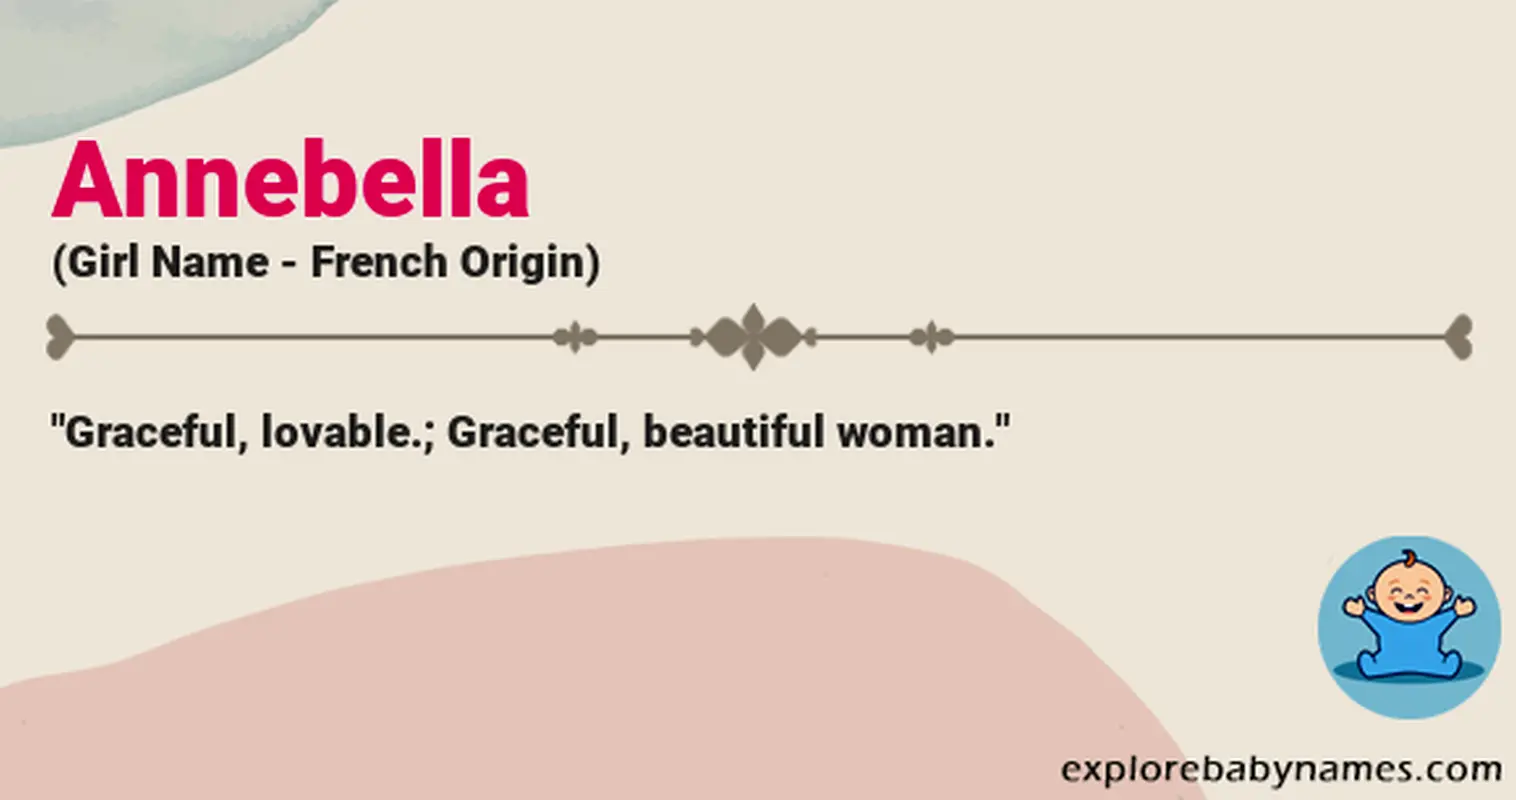 Meaning of Annebella